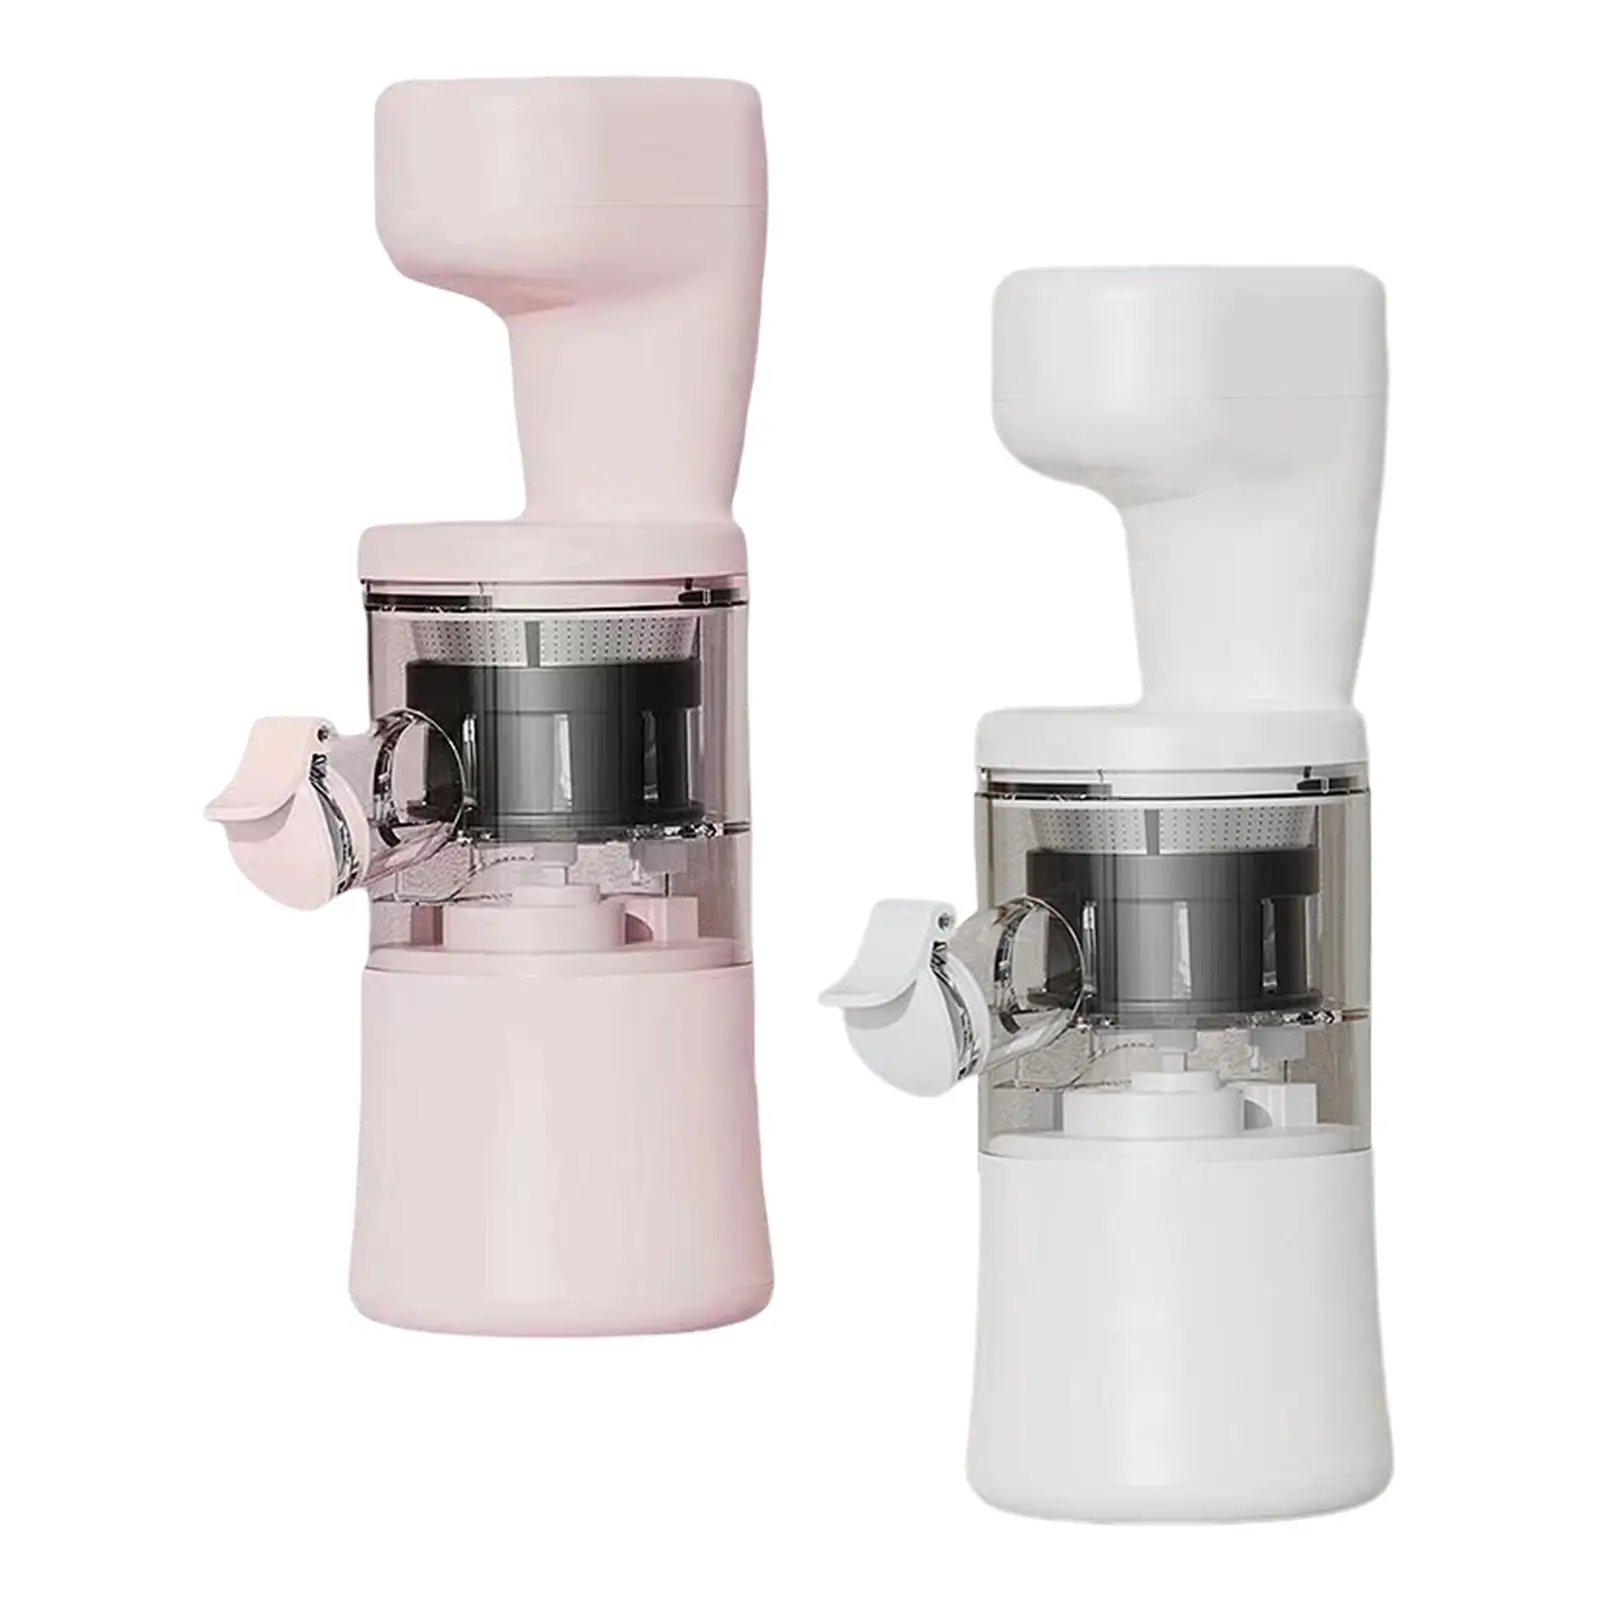 Portable Blender Electric USB Rechargeable Juicer Machine for Shakes and Smoothies